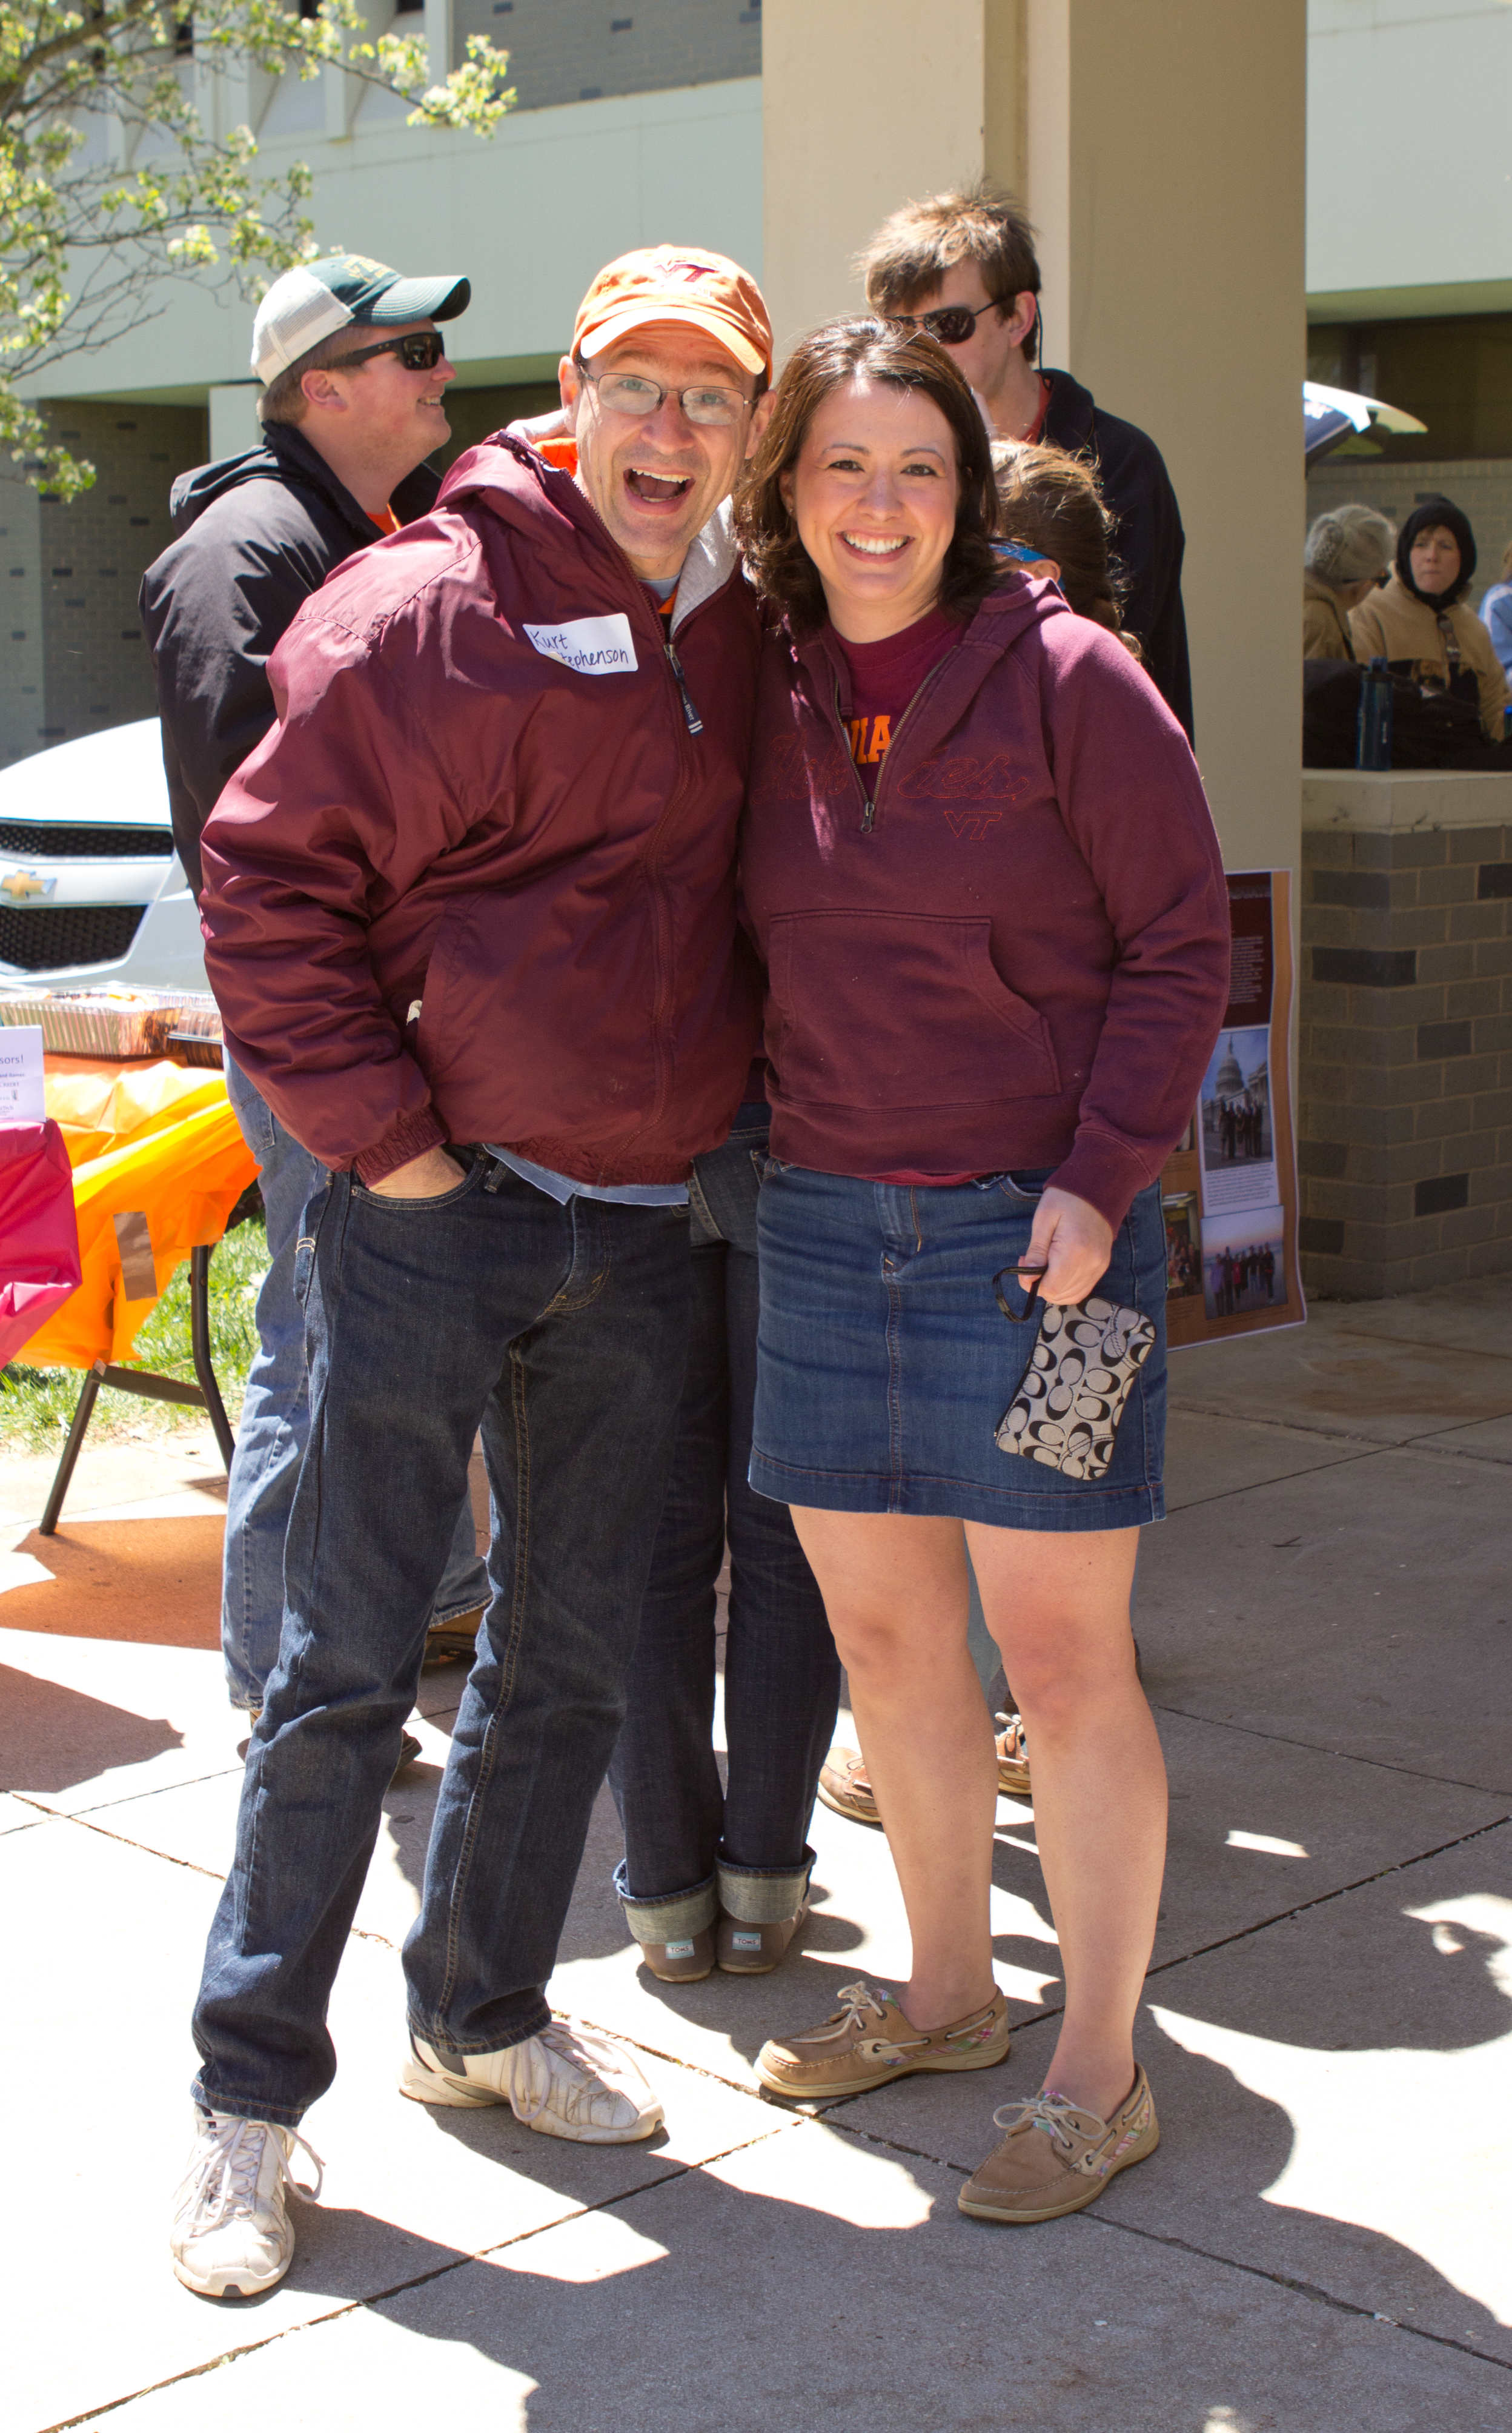 aculty and alumni enjoy the opportunity to reconnect at last year's tailgate.